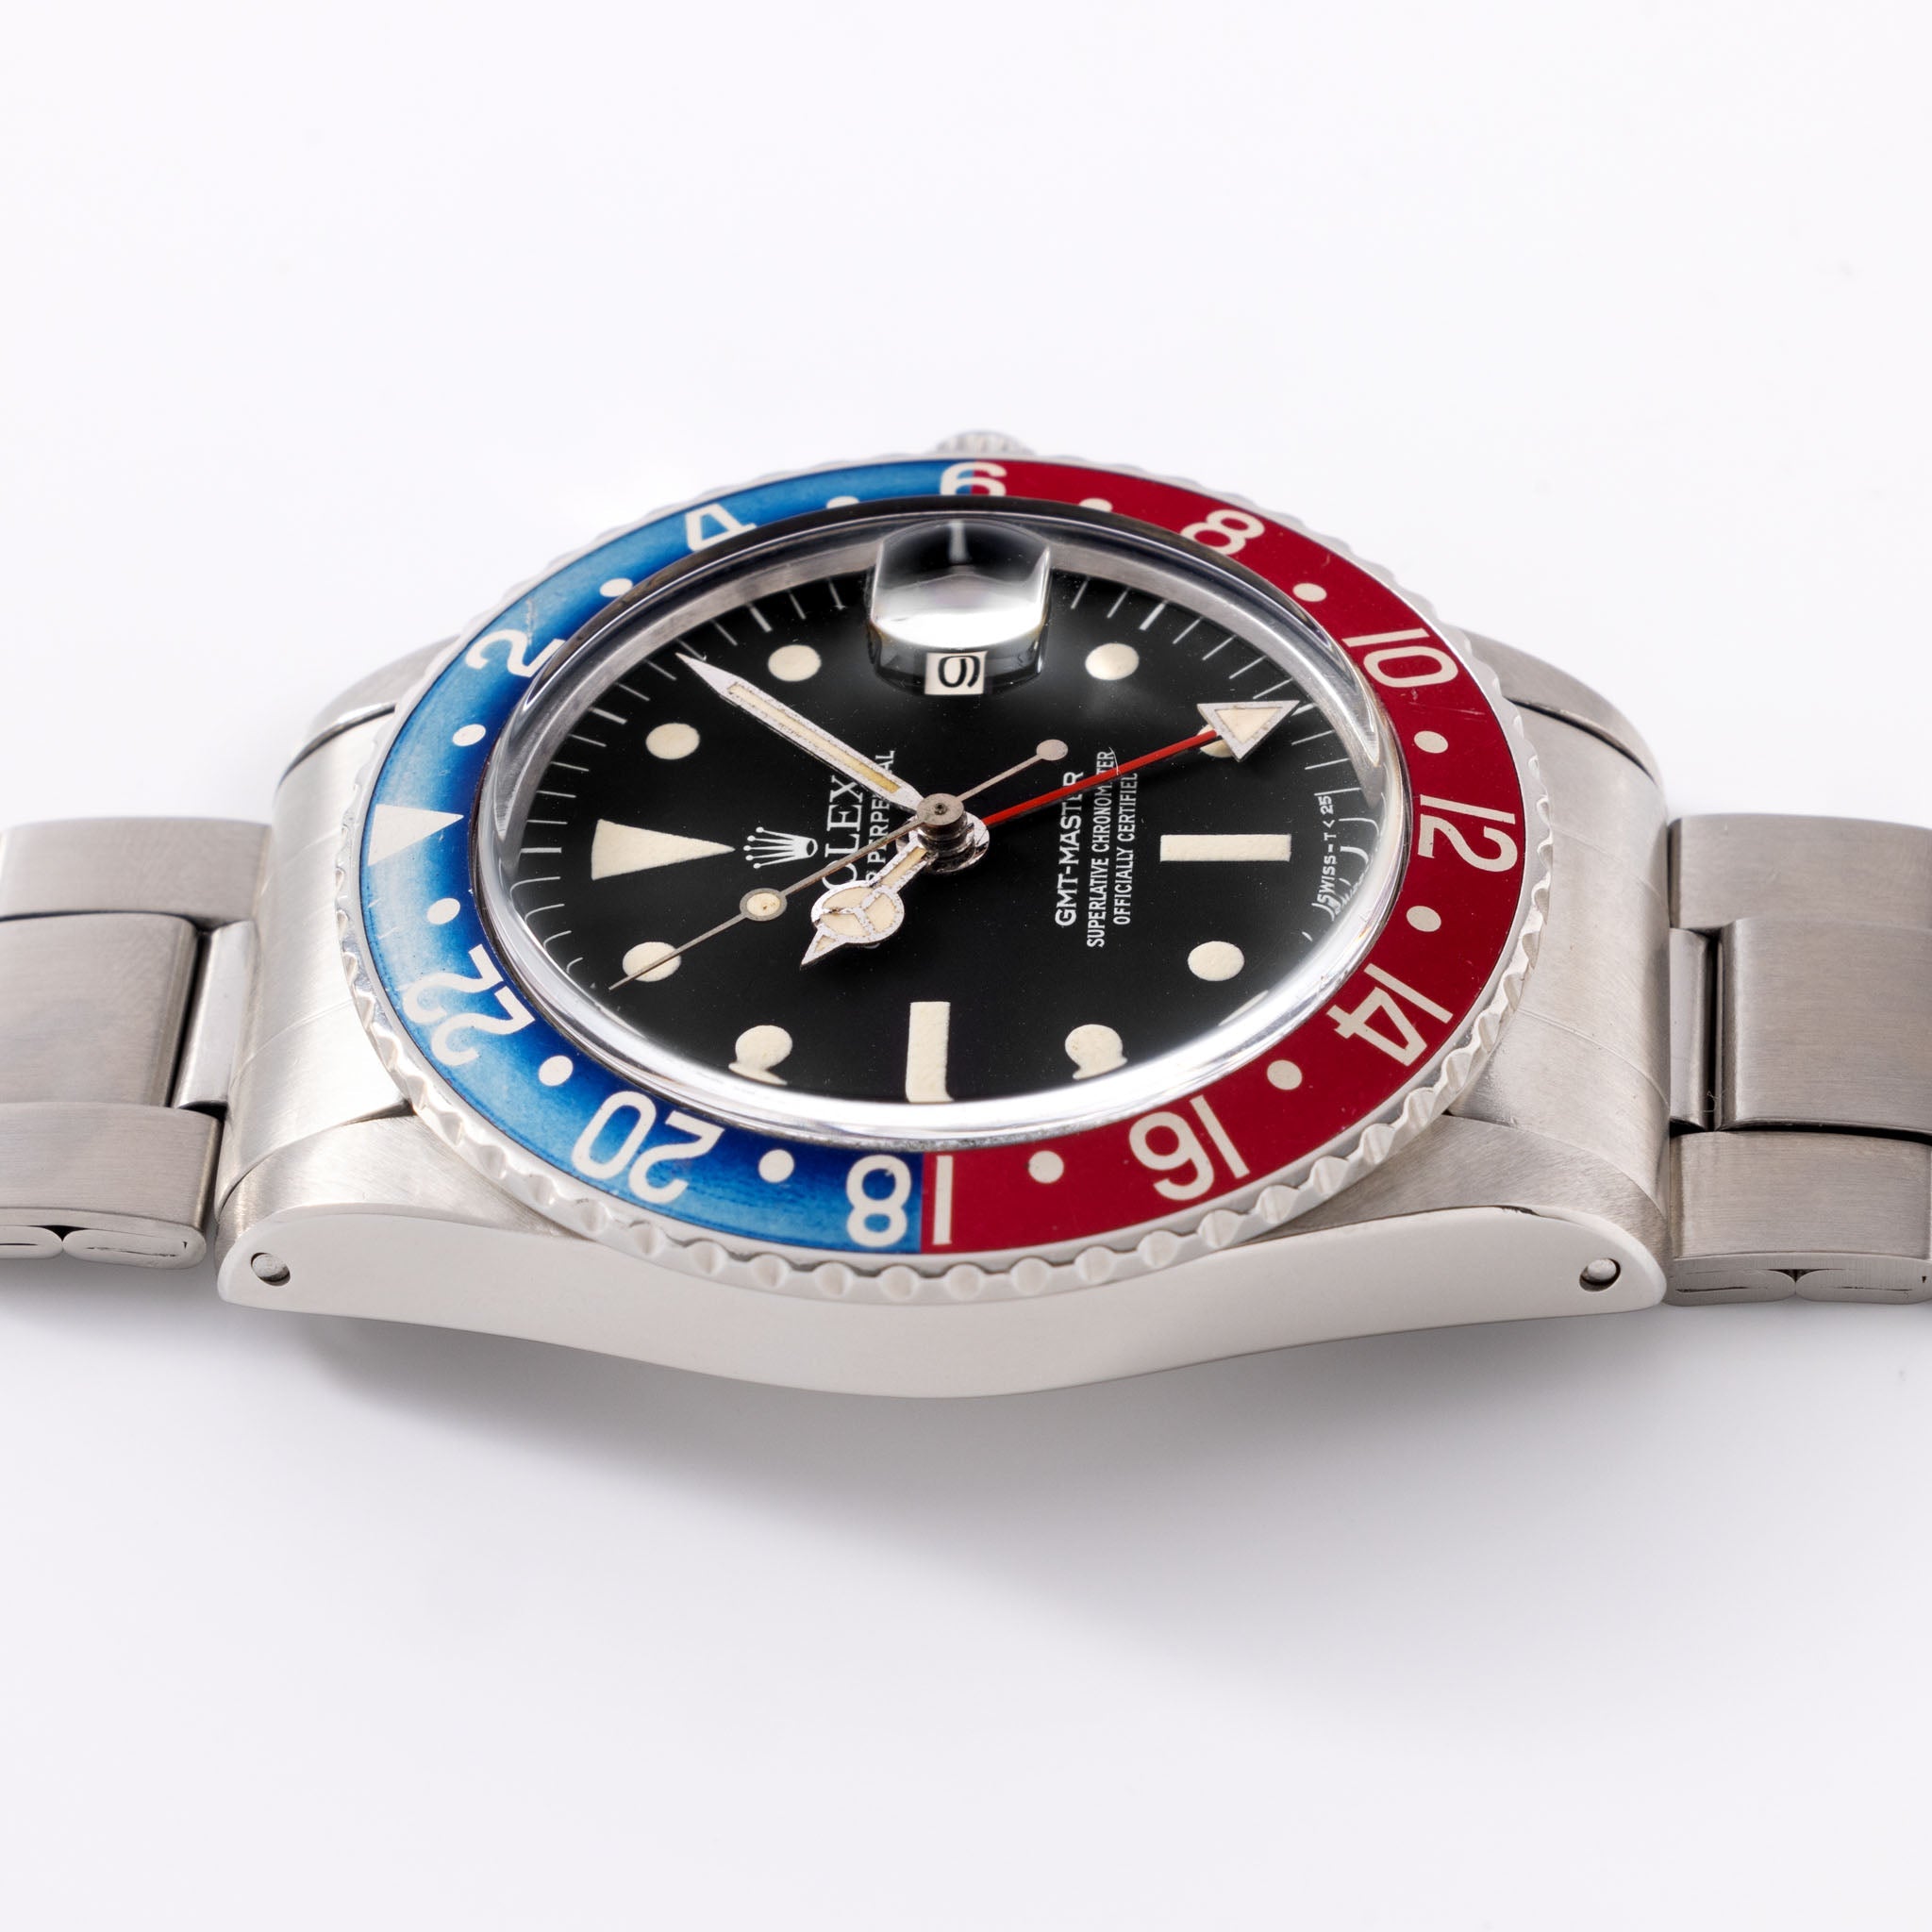 Rolex GMT-Master Mk3 Radial Dial with Papers Ref 1675 